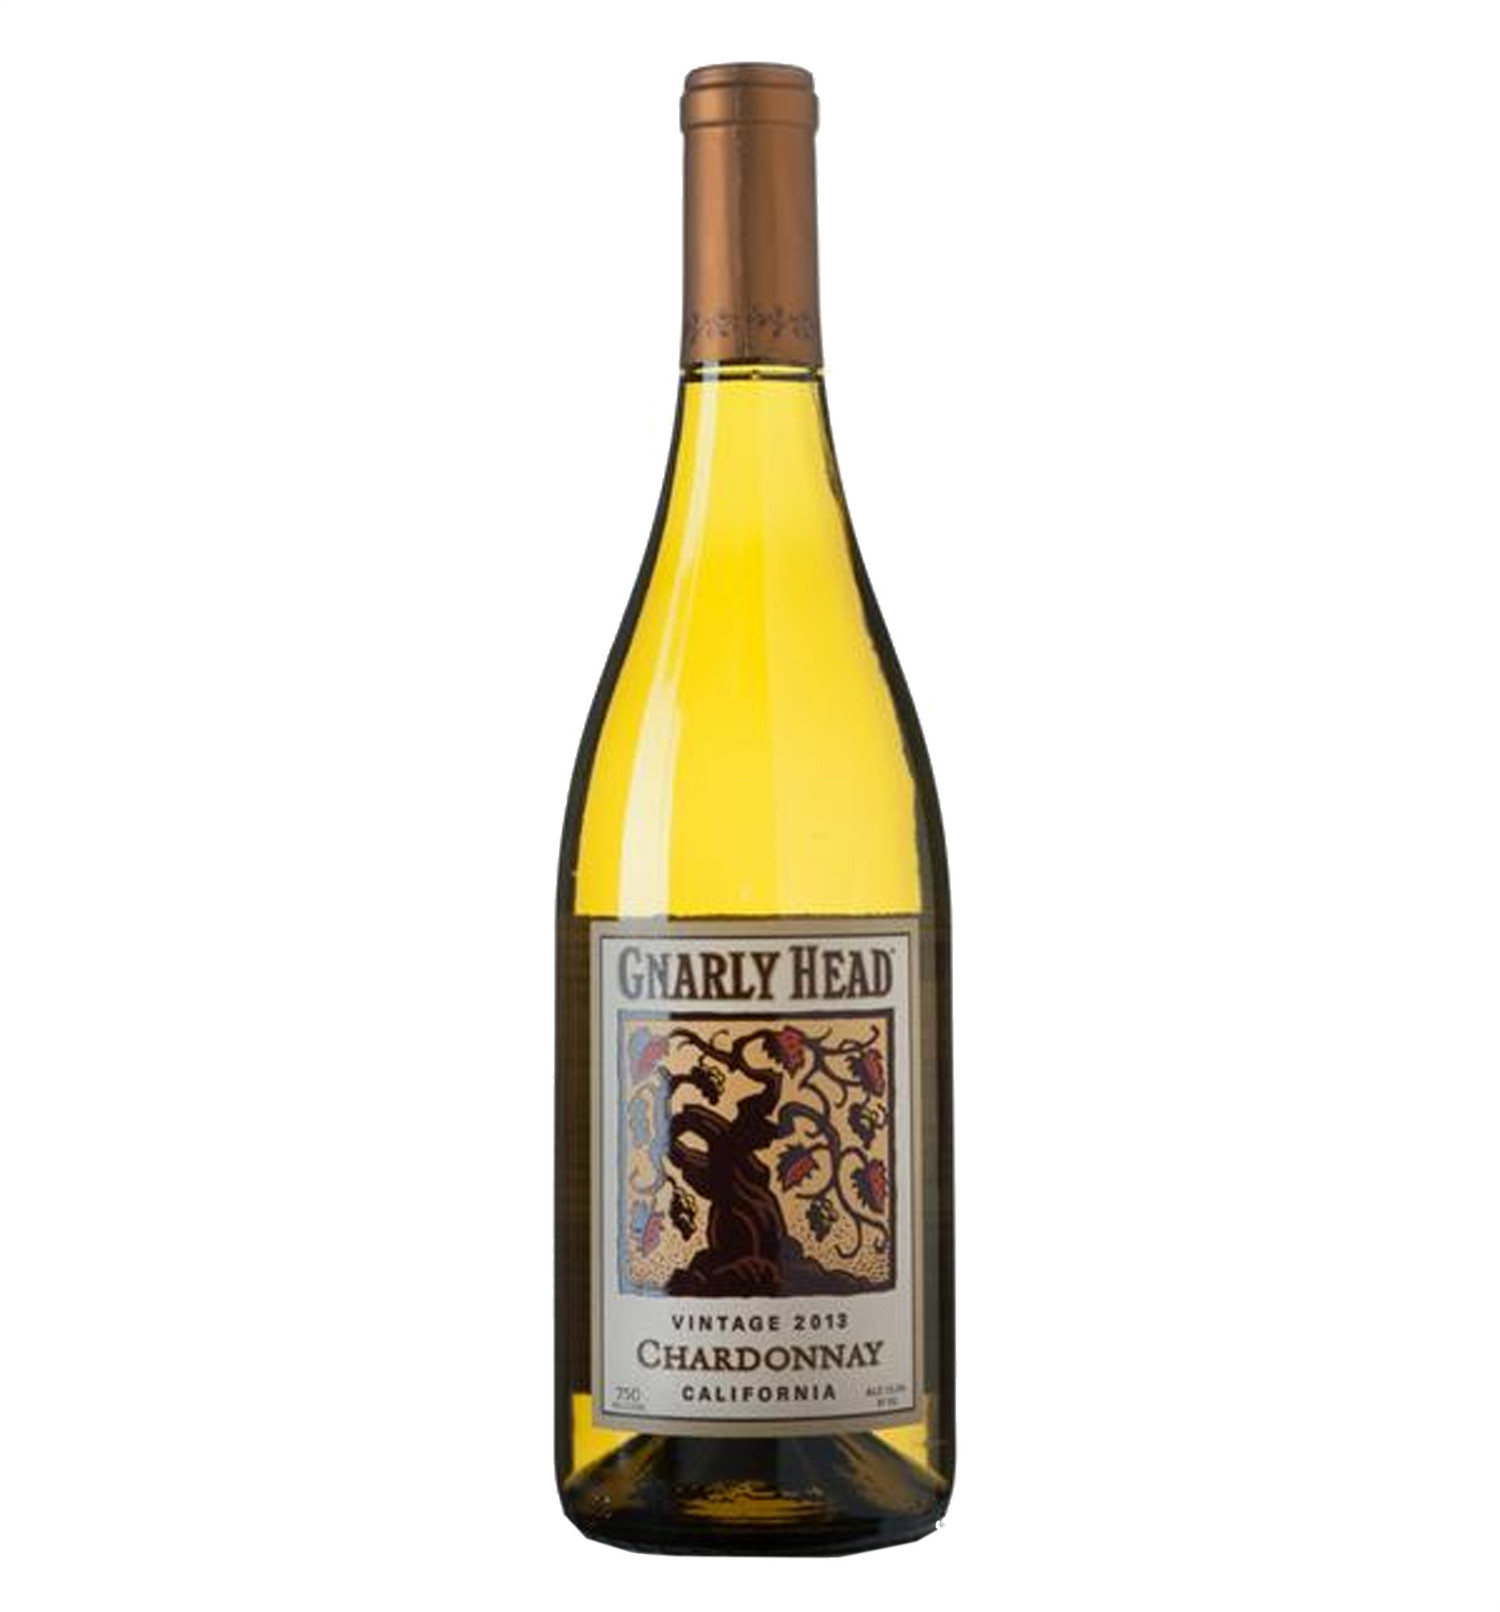 gnarly-head-chardonnay-2013-6-free-delivery-uncle-fossil-wine-spirits